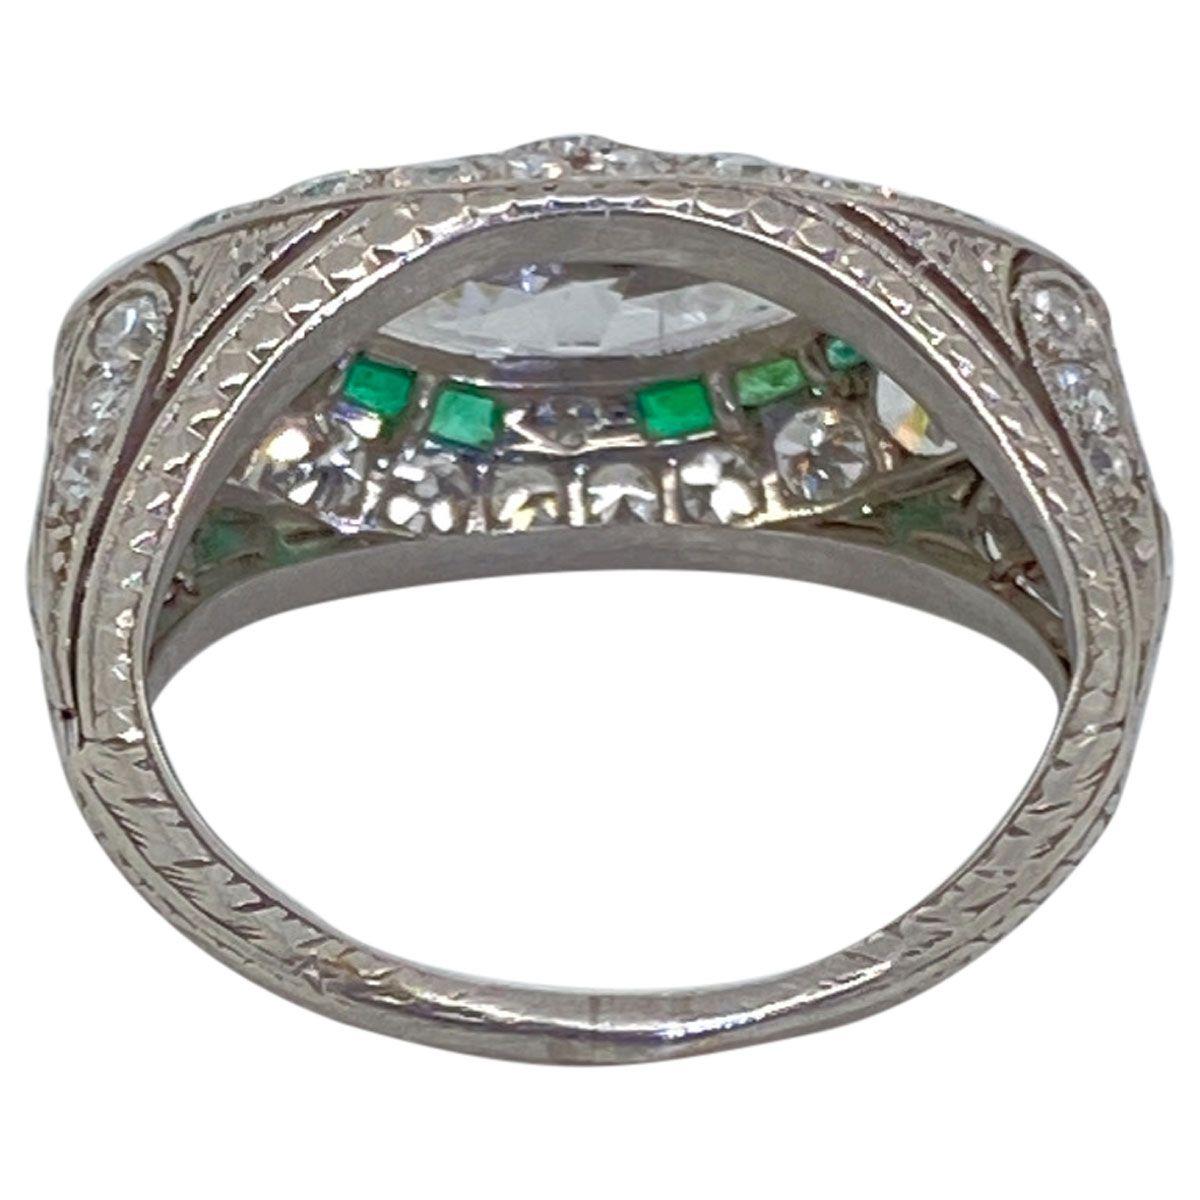 Women's Art Deco Platinum East West Marquise Cut Diamond and Emerald Ring